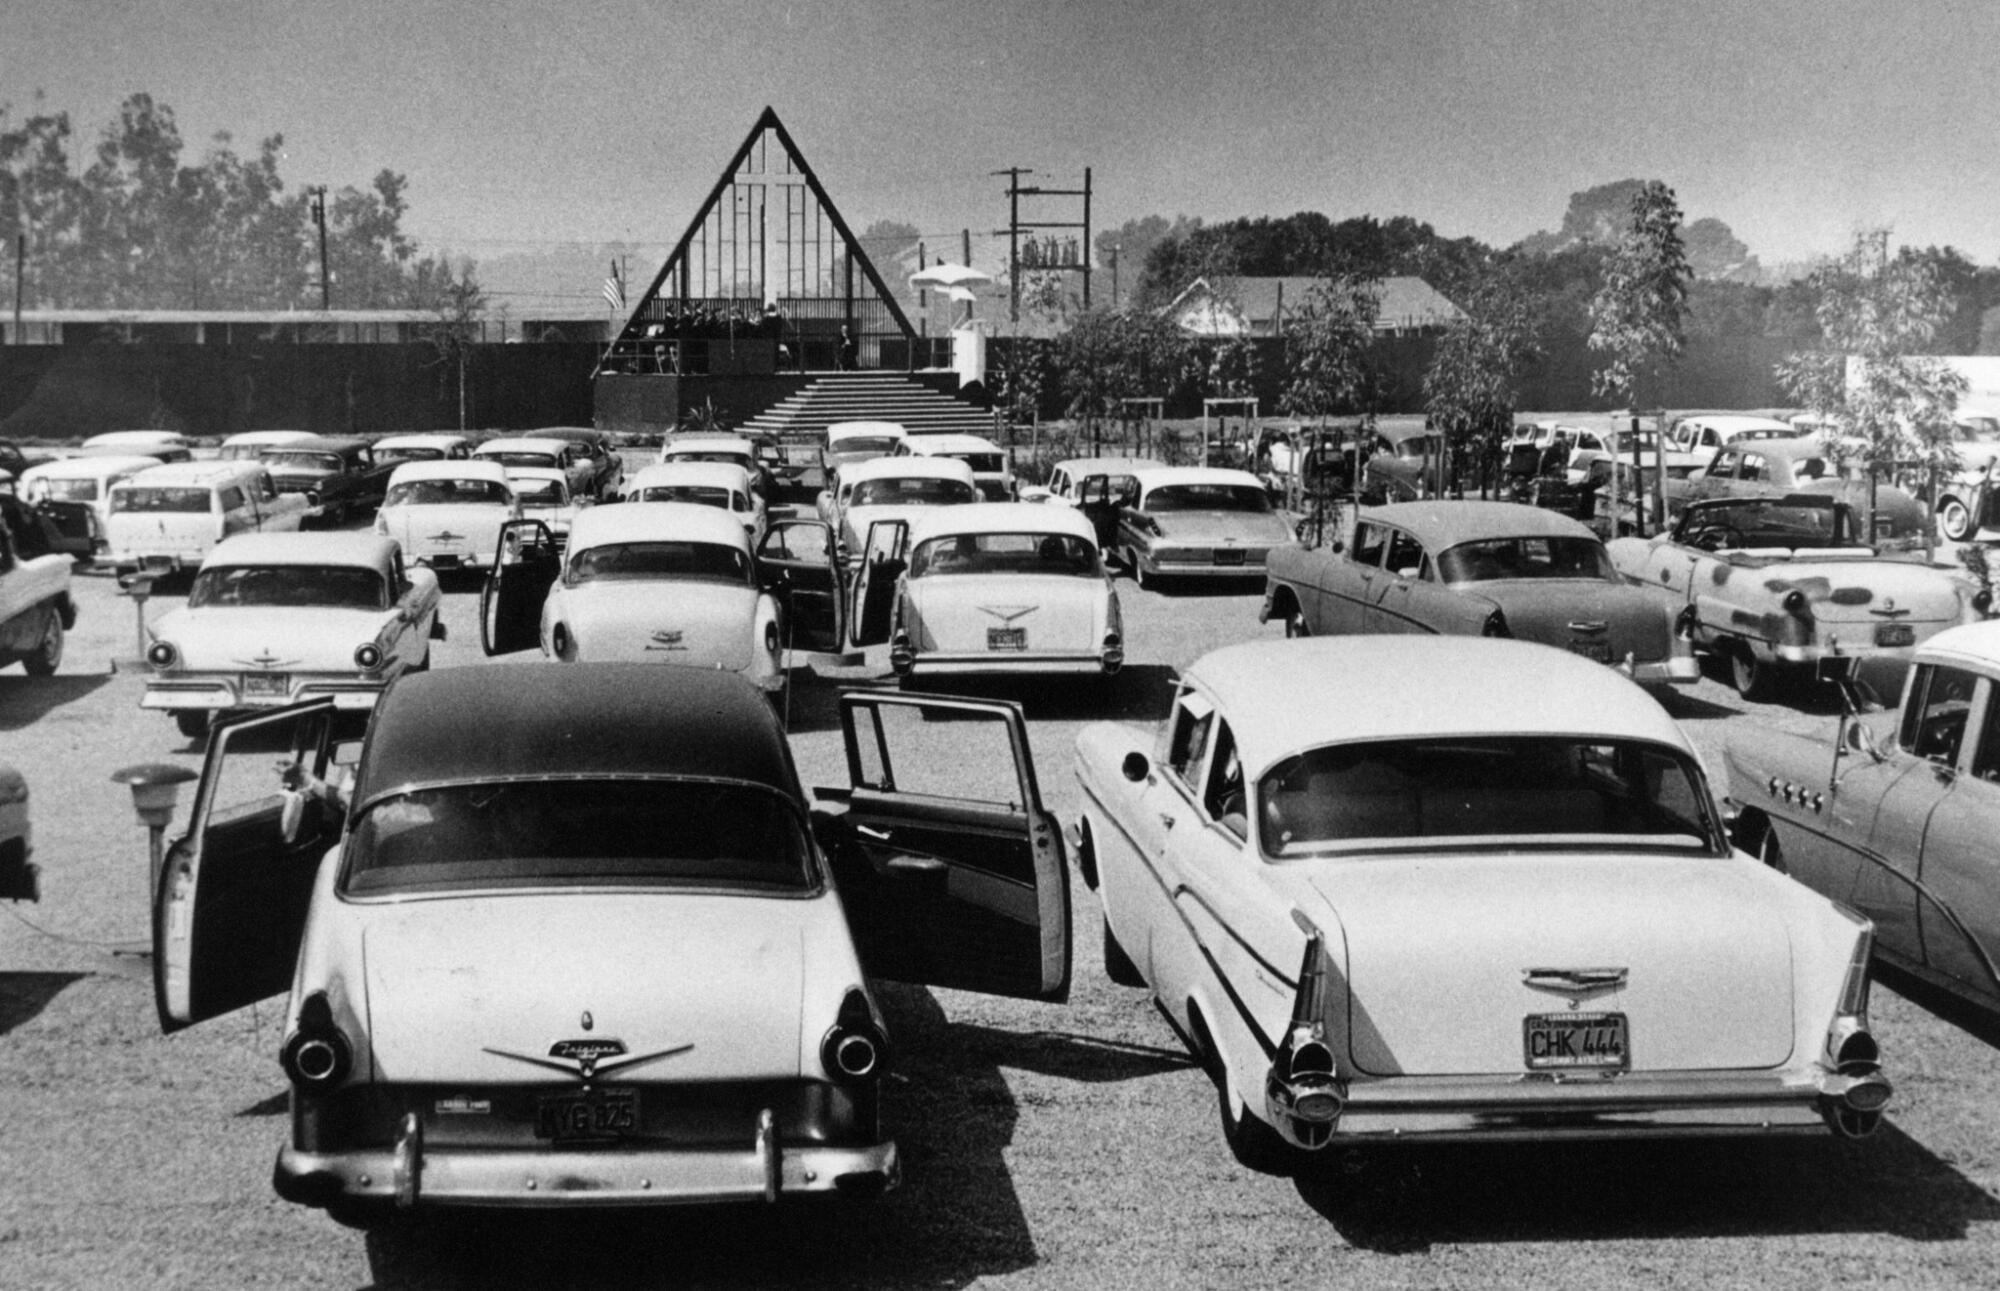 In June 1957, the Rev. Robert H. Schuller held his Garden Grove Community Church service at the Orange Drive-In. The church had no permanent building and rented the drive-in each Sunday.